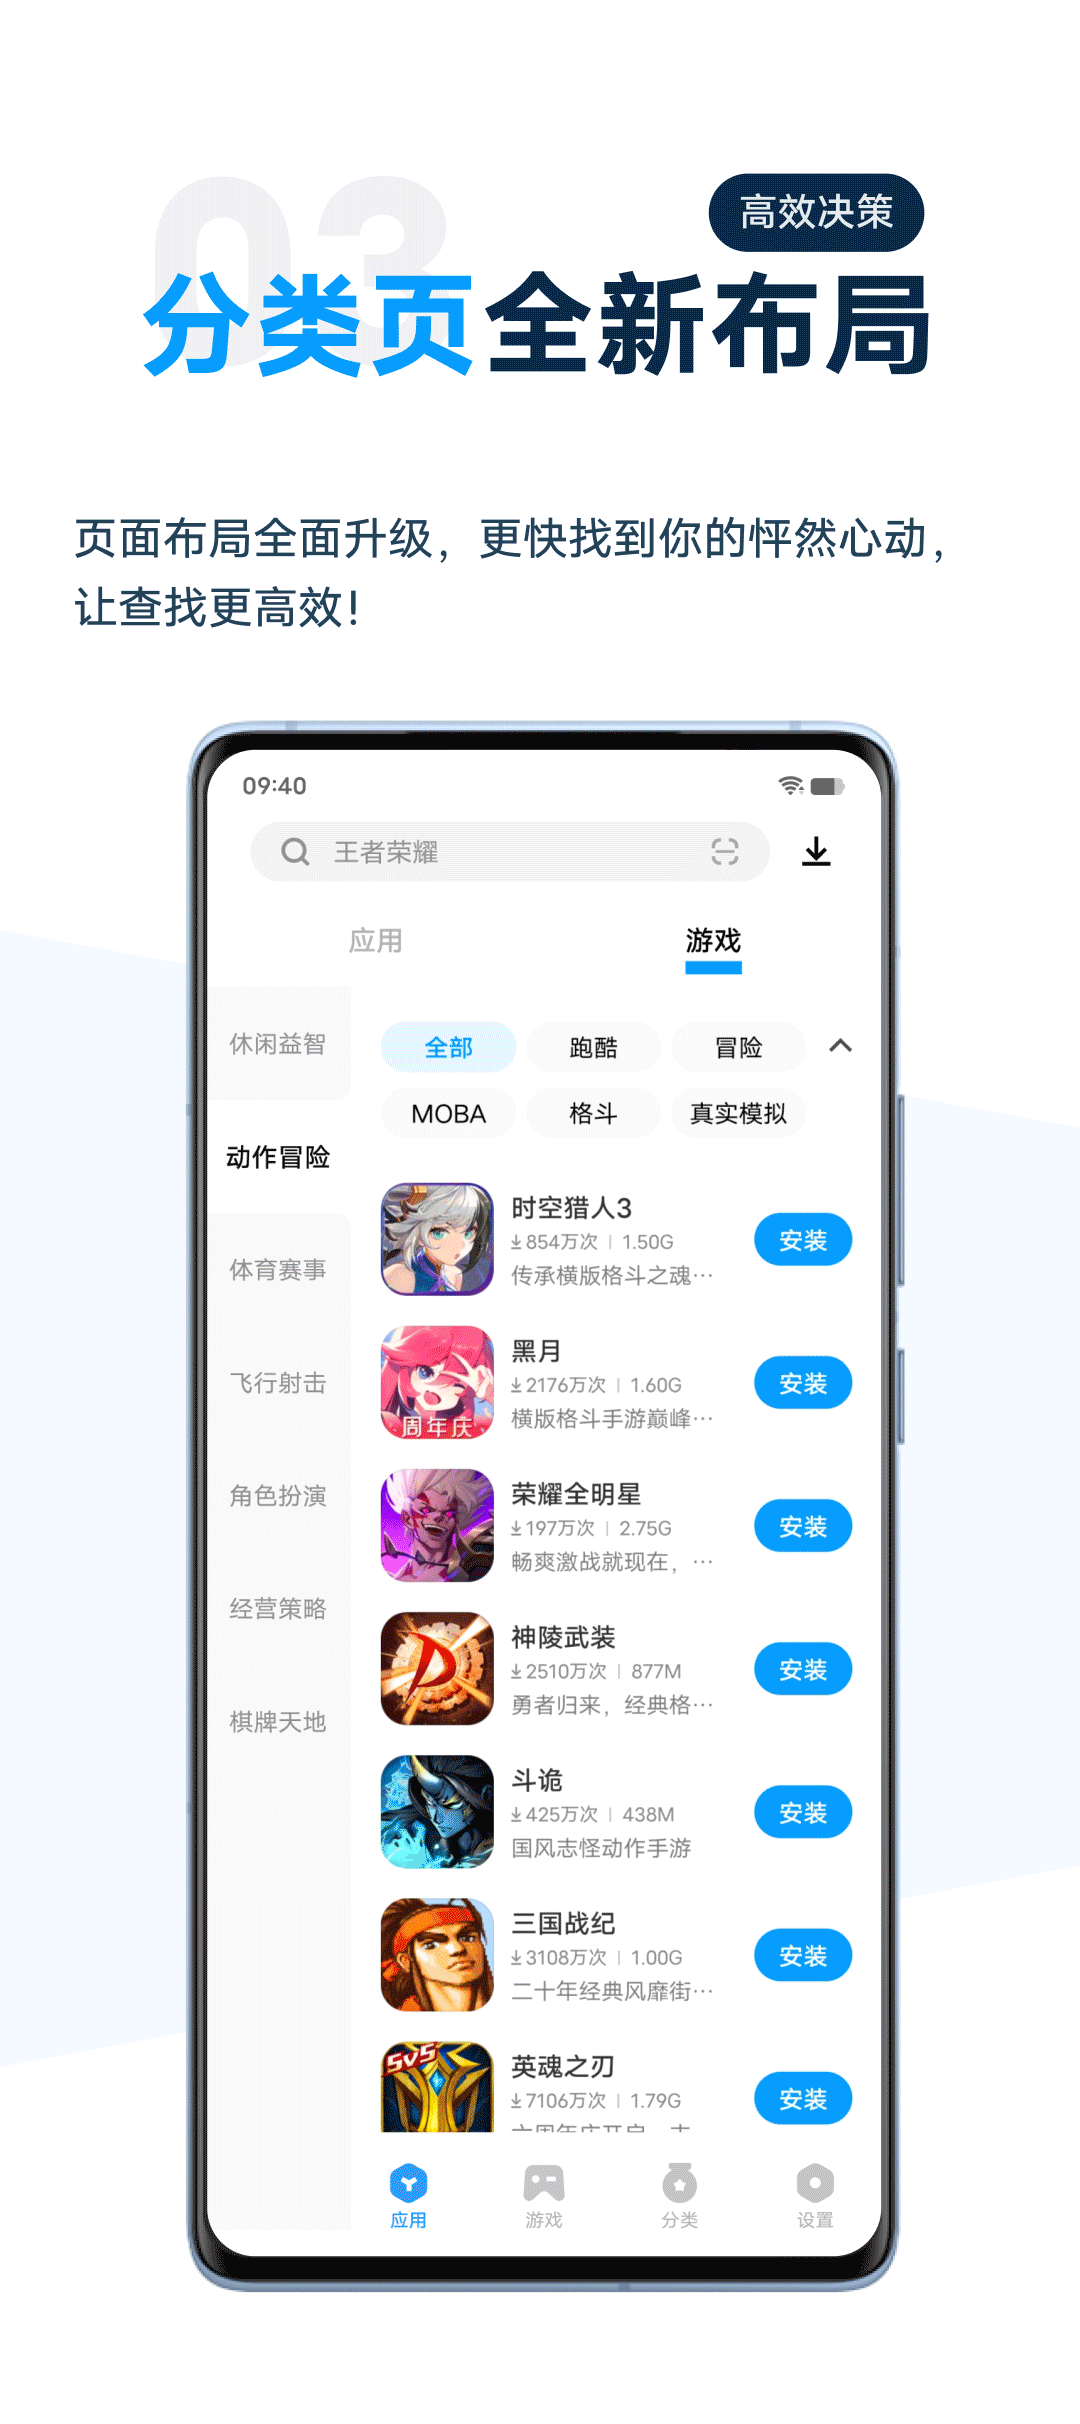 Vivo App Store version 9.0 adds 5 new traffic scenarios, and the UI is completely updated